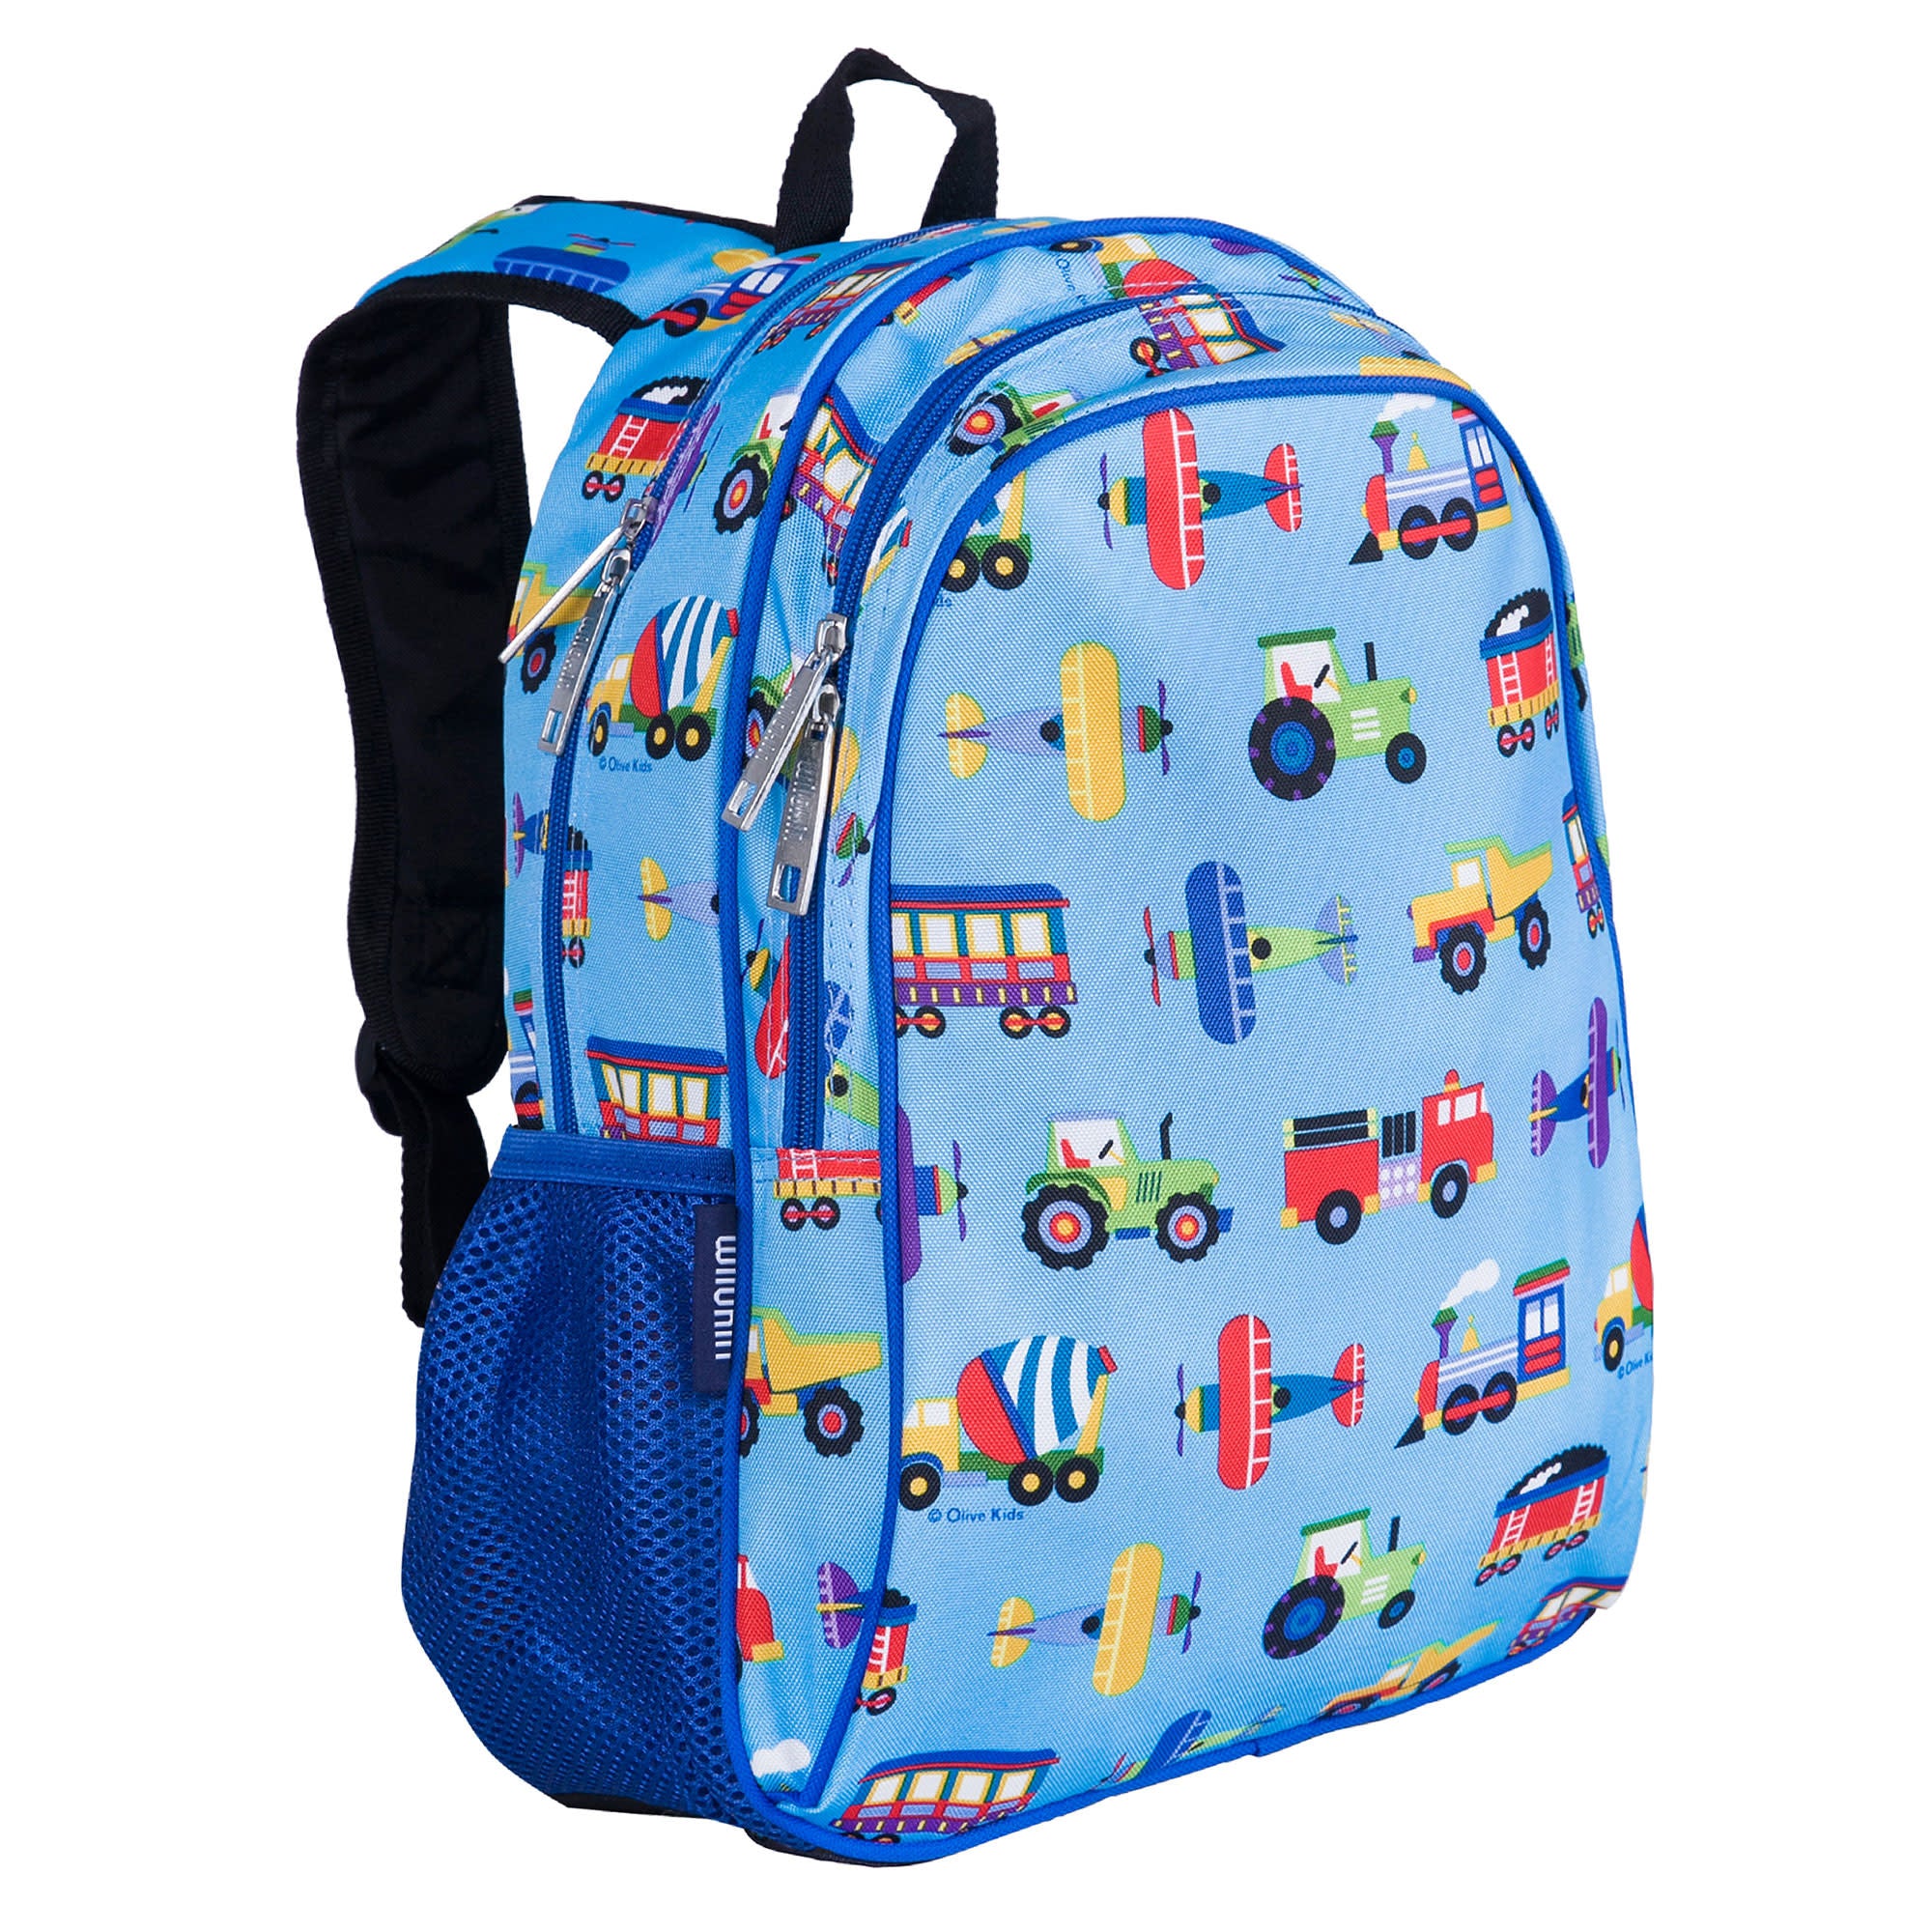 Trains, Planes and Trucks Backpack